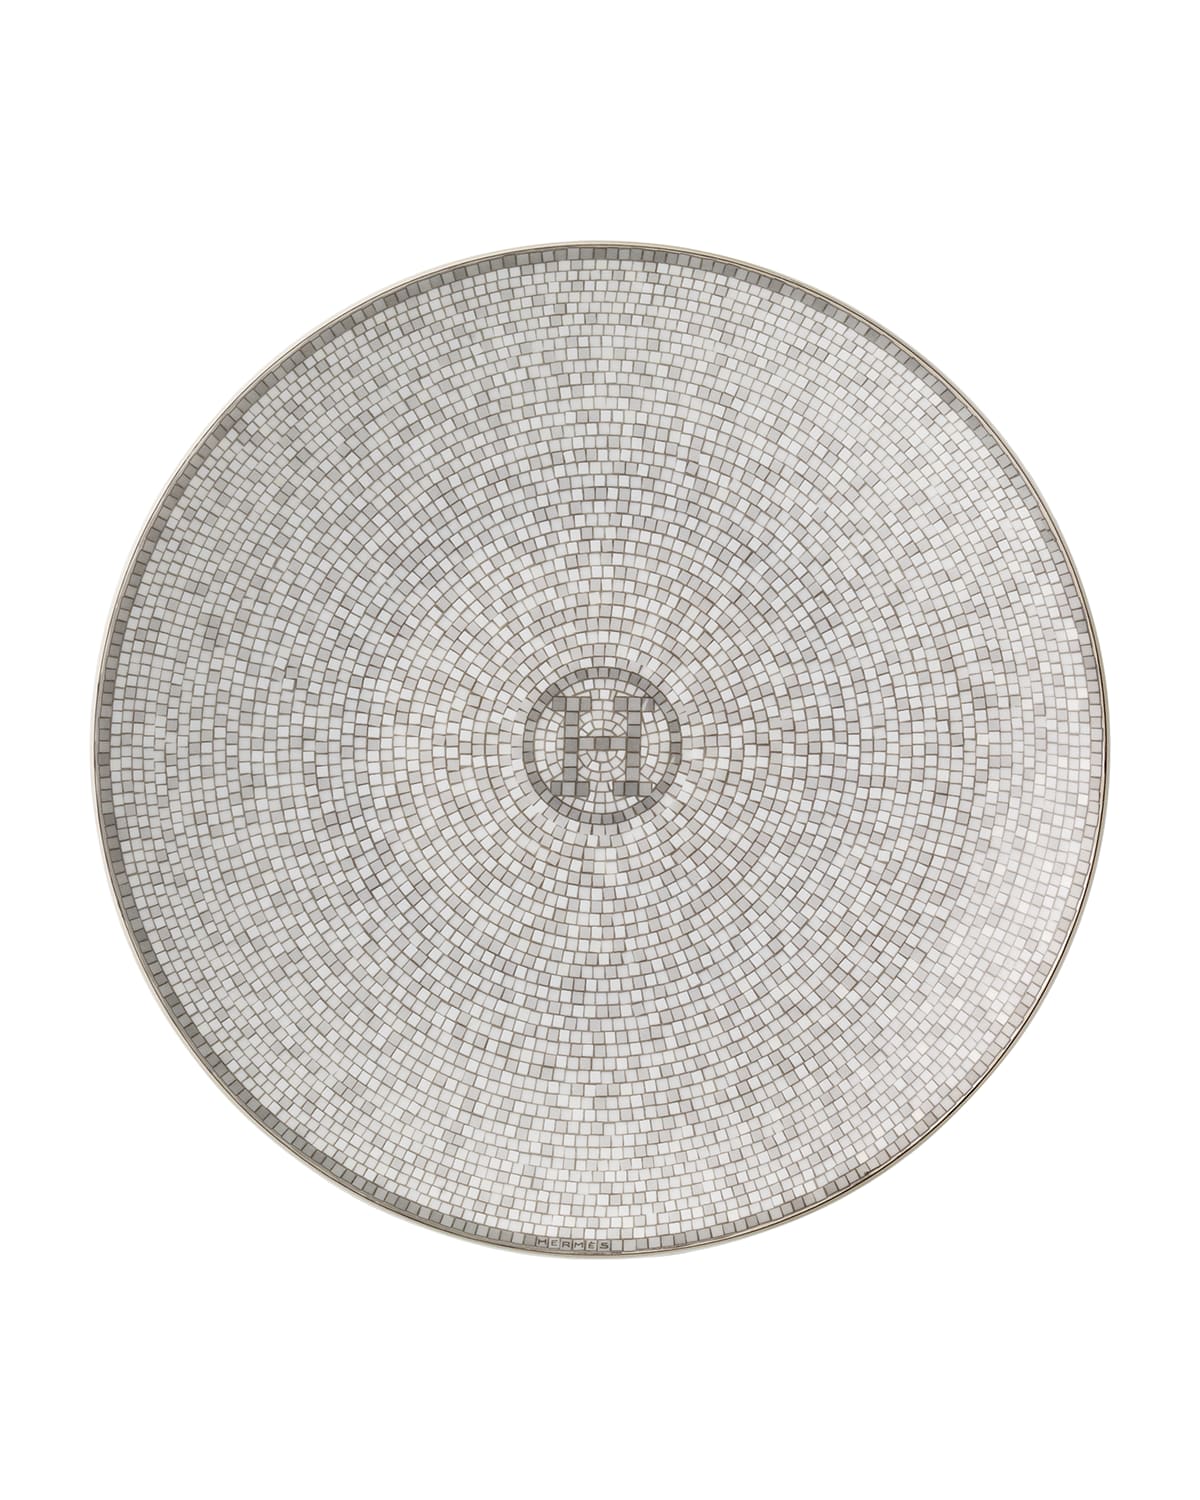 Pre-owned Hermes Mosaique Au 24 Platinum Bread & Butter Plate In Multi